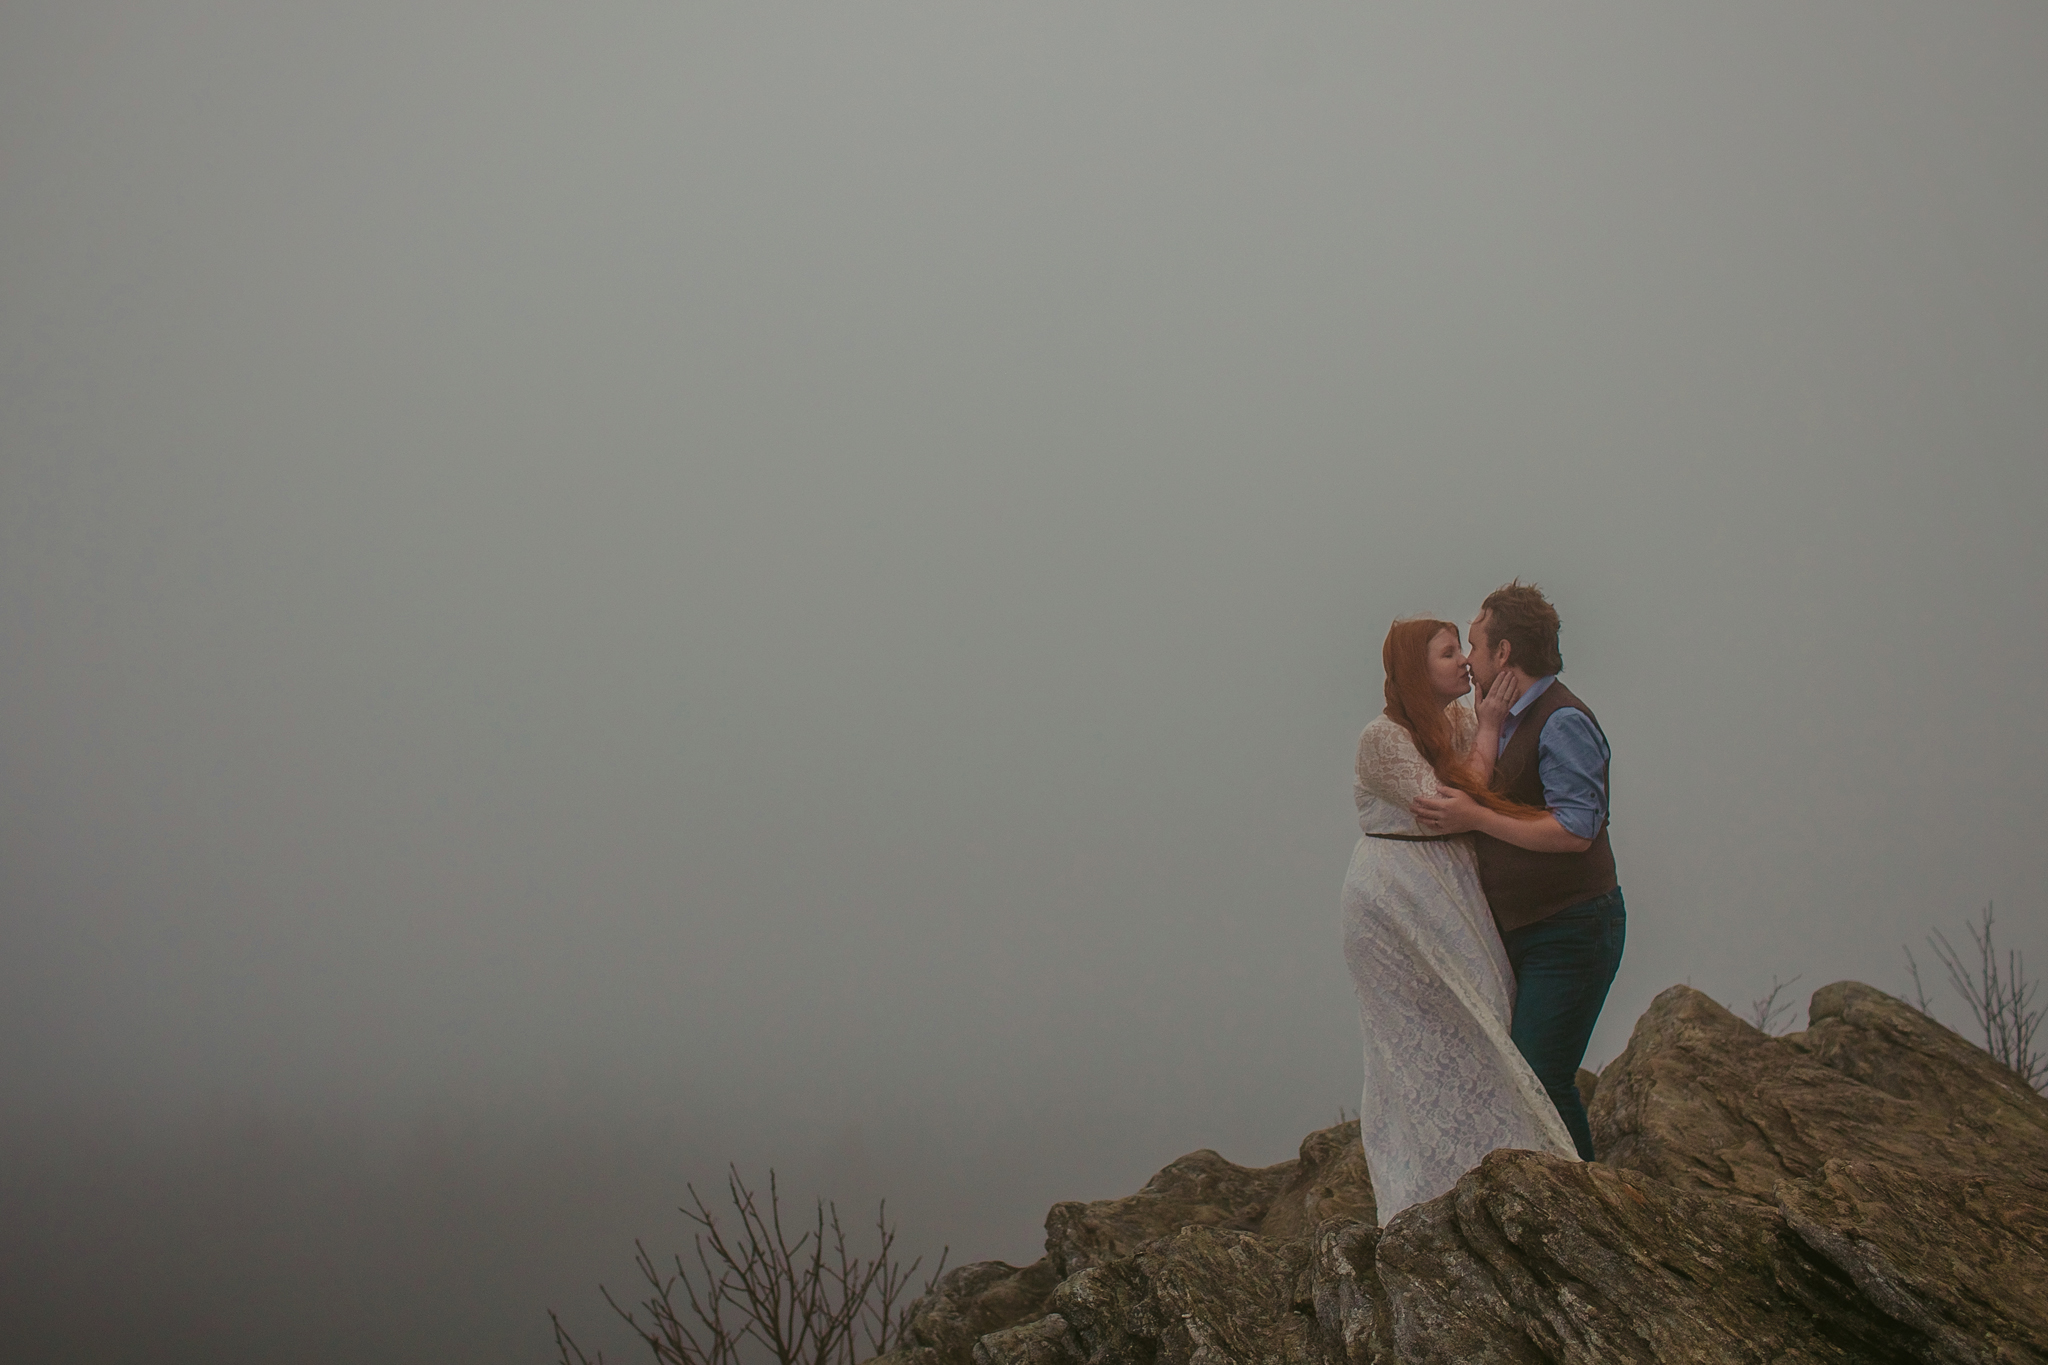 A romantic cloudy engagement session in Asheville on Black Balsam Knob